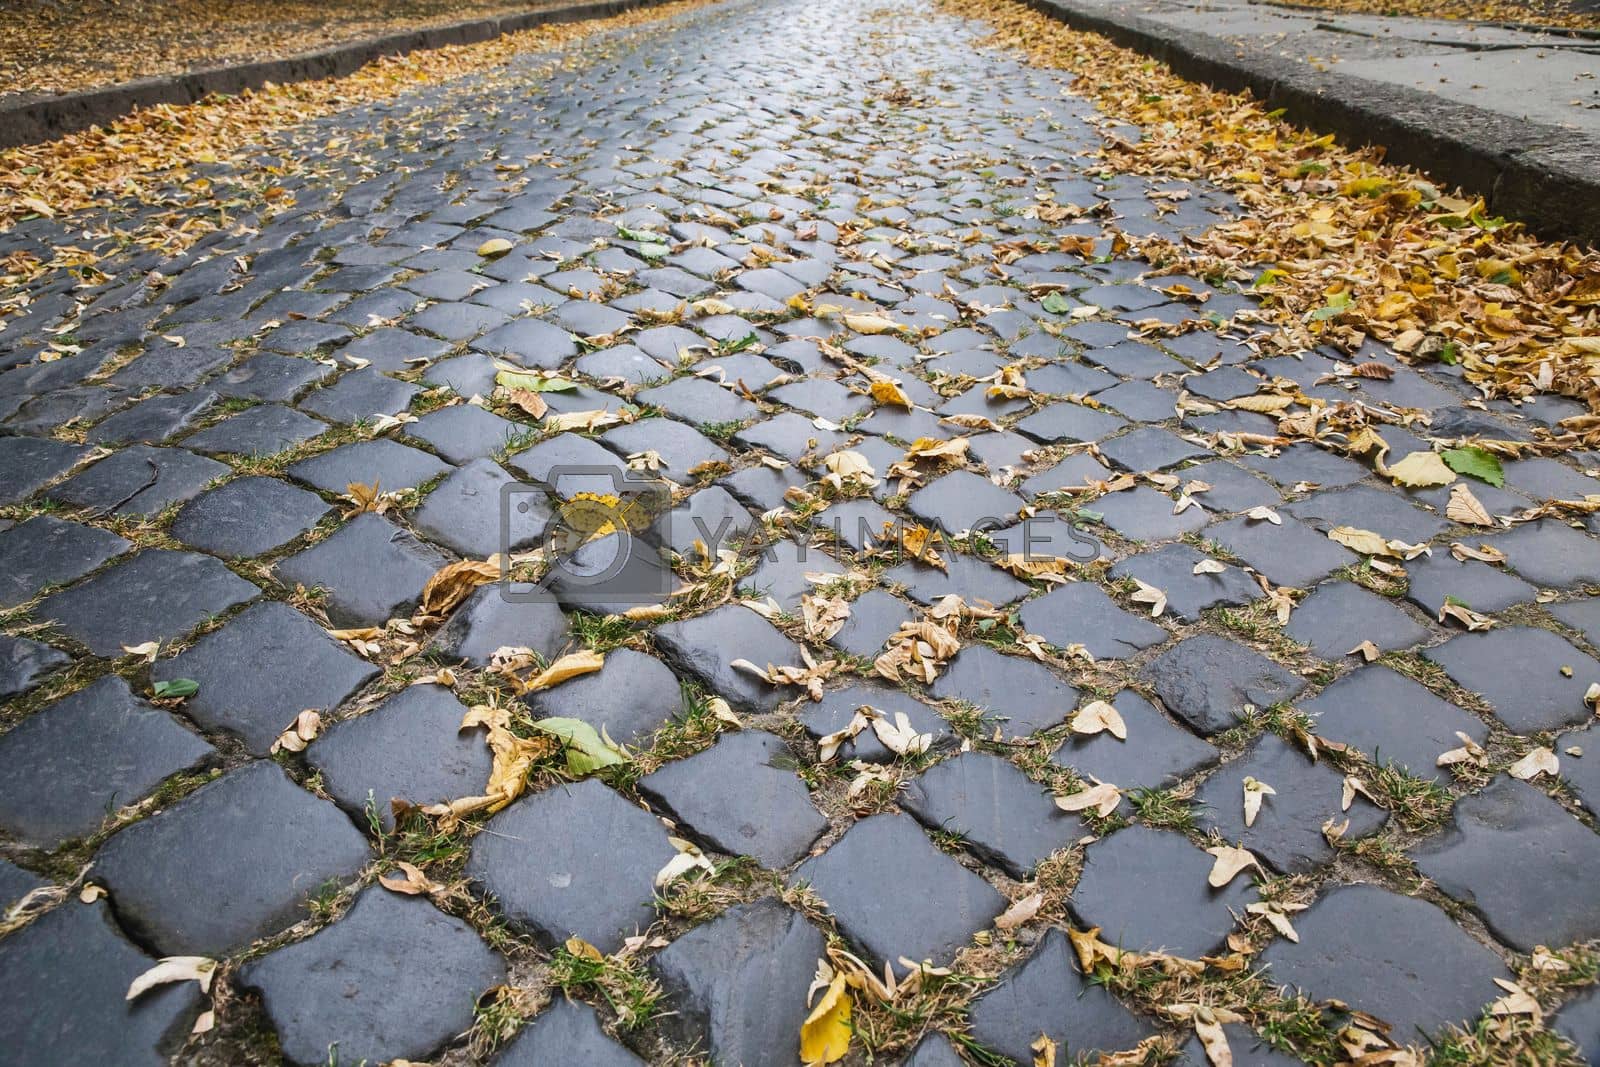 Royalty free image of polished stone paving stones with yellow fallen leaves by Viktor_Osypenko